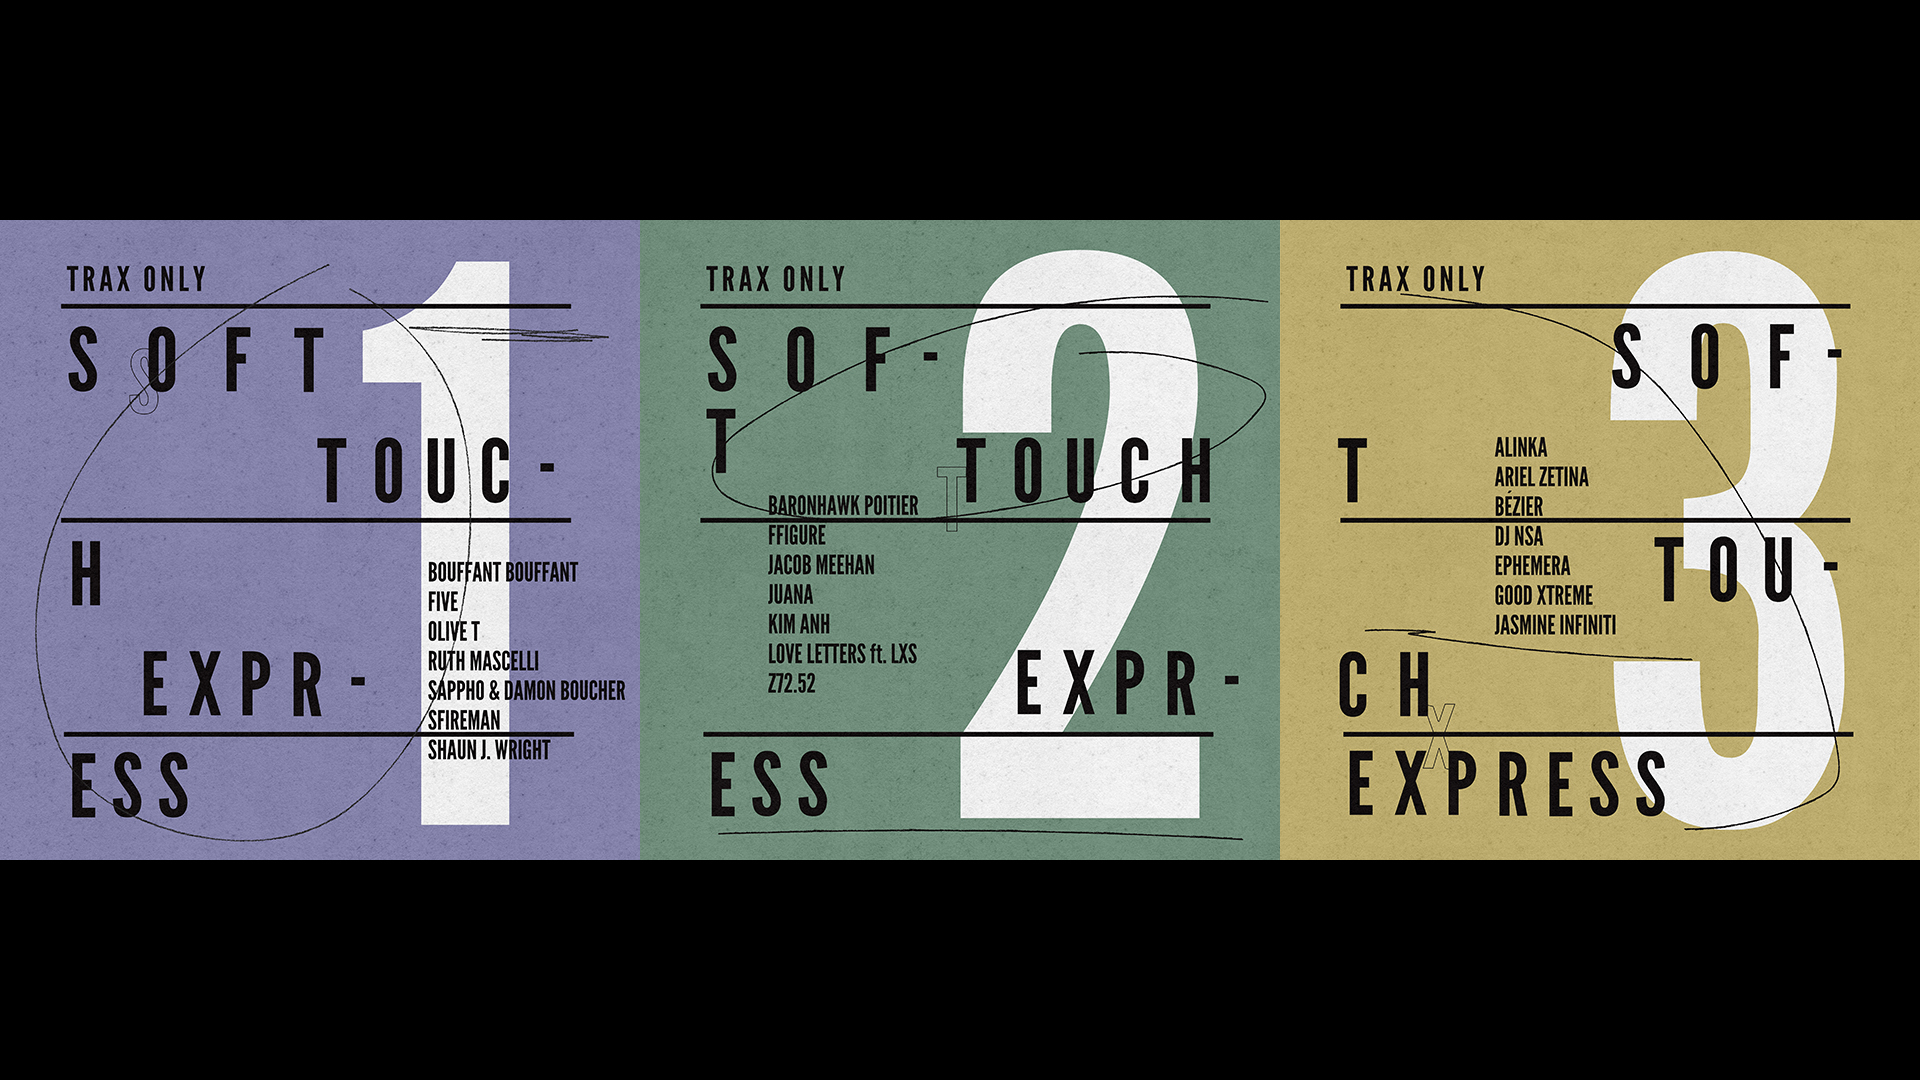 Trax Only – Soft Touch Express